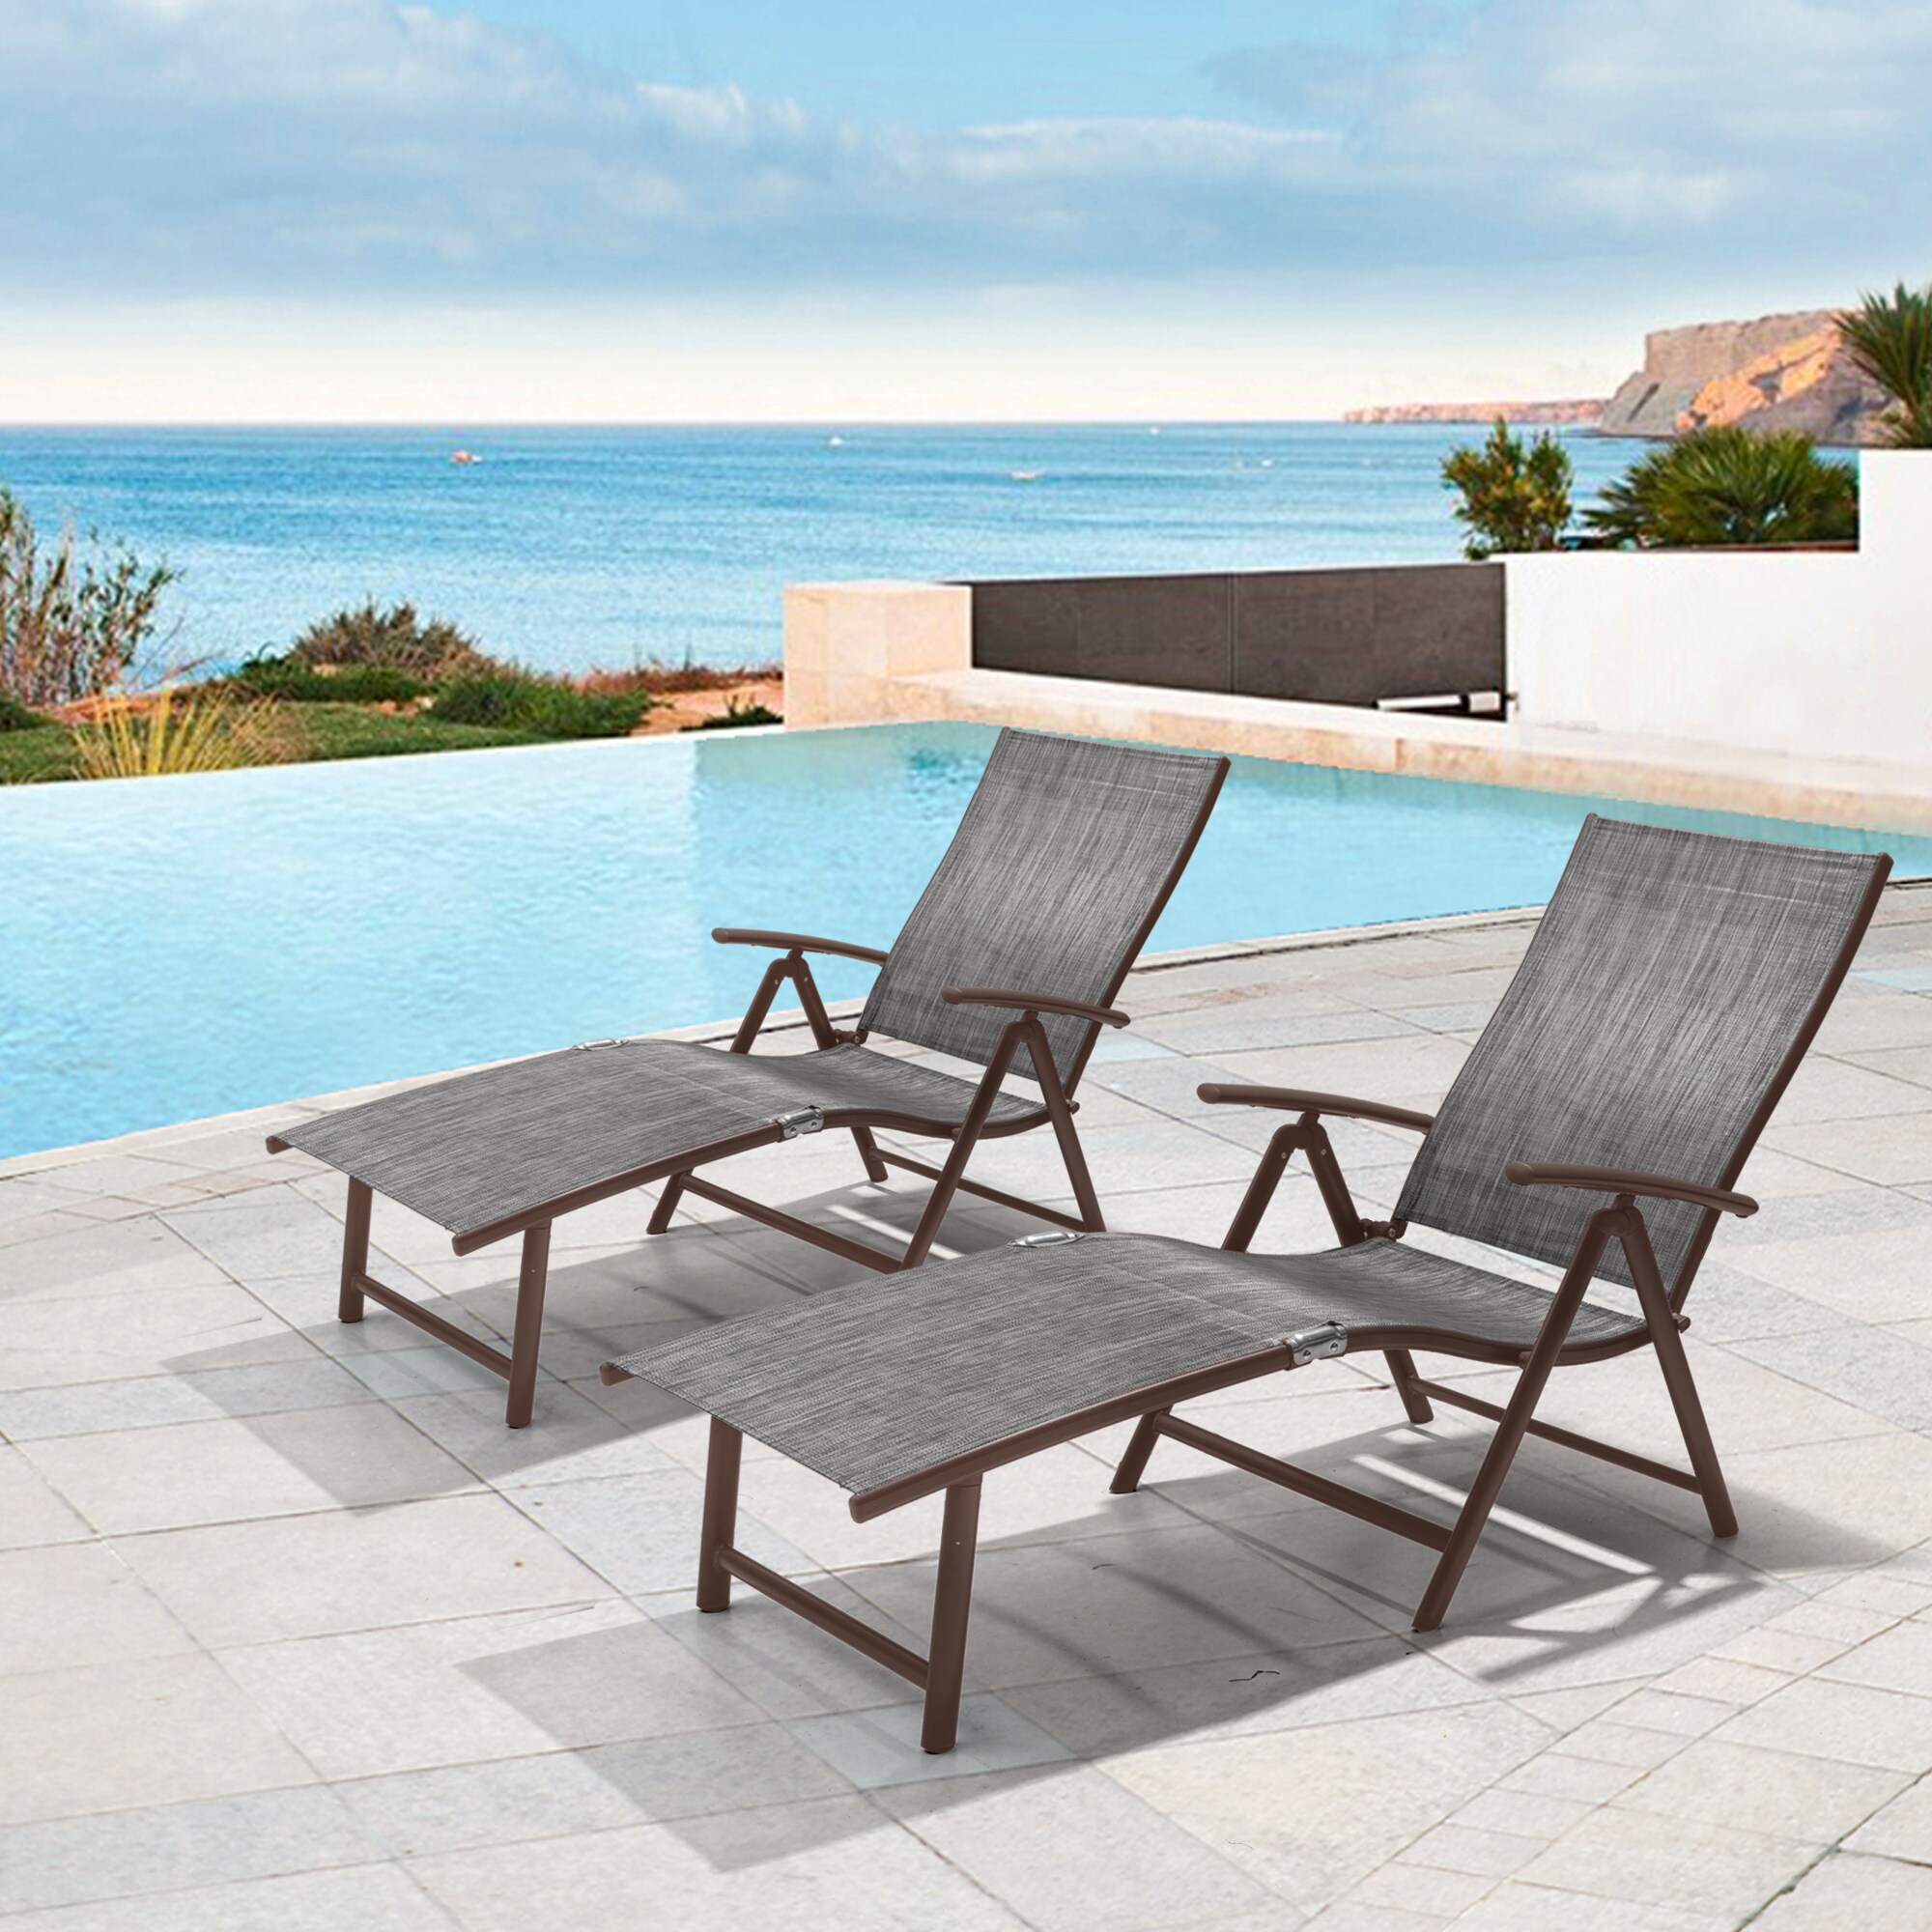 Crestlive Products Patio chaise lounge Set of 2 Aluminum Frame In Brown ...